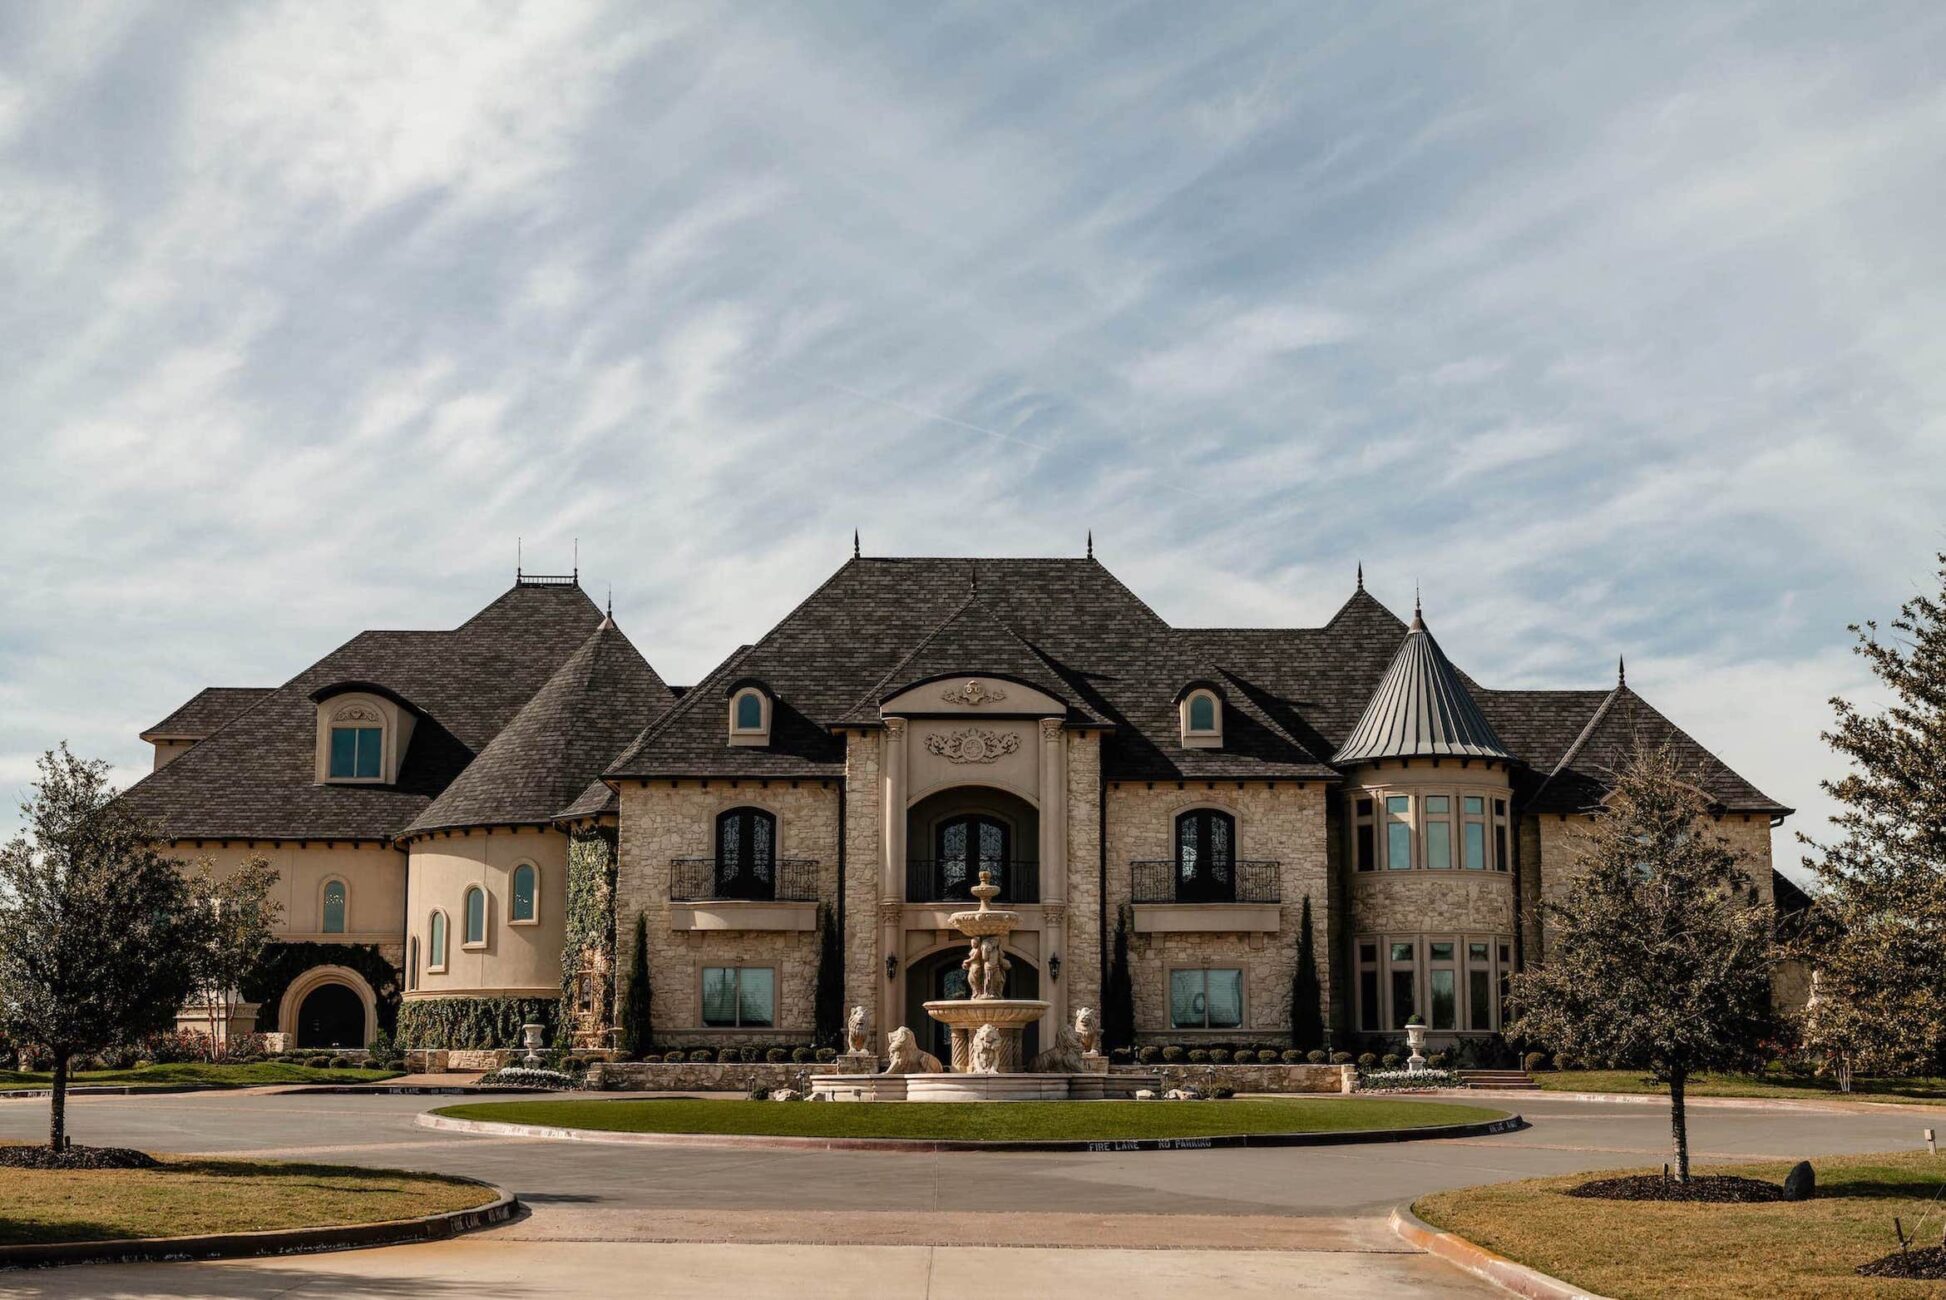 Entrance of Knotting Hill Place: A grand, beautifully adorned entrance leading to the enchanting wedding venue in Little Elm, Texas